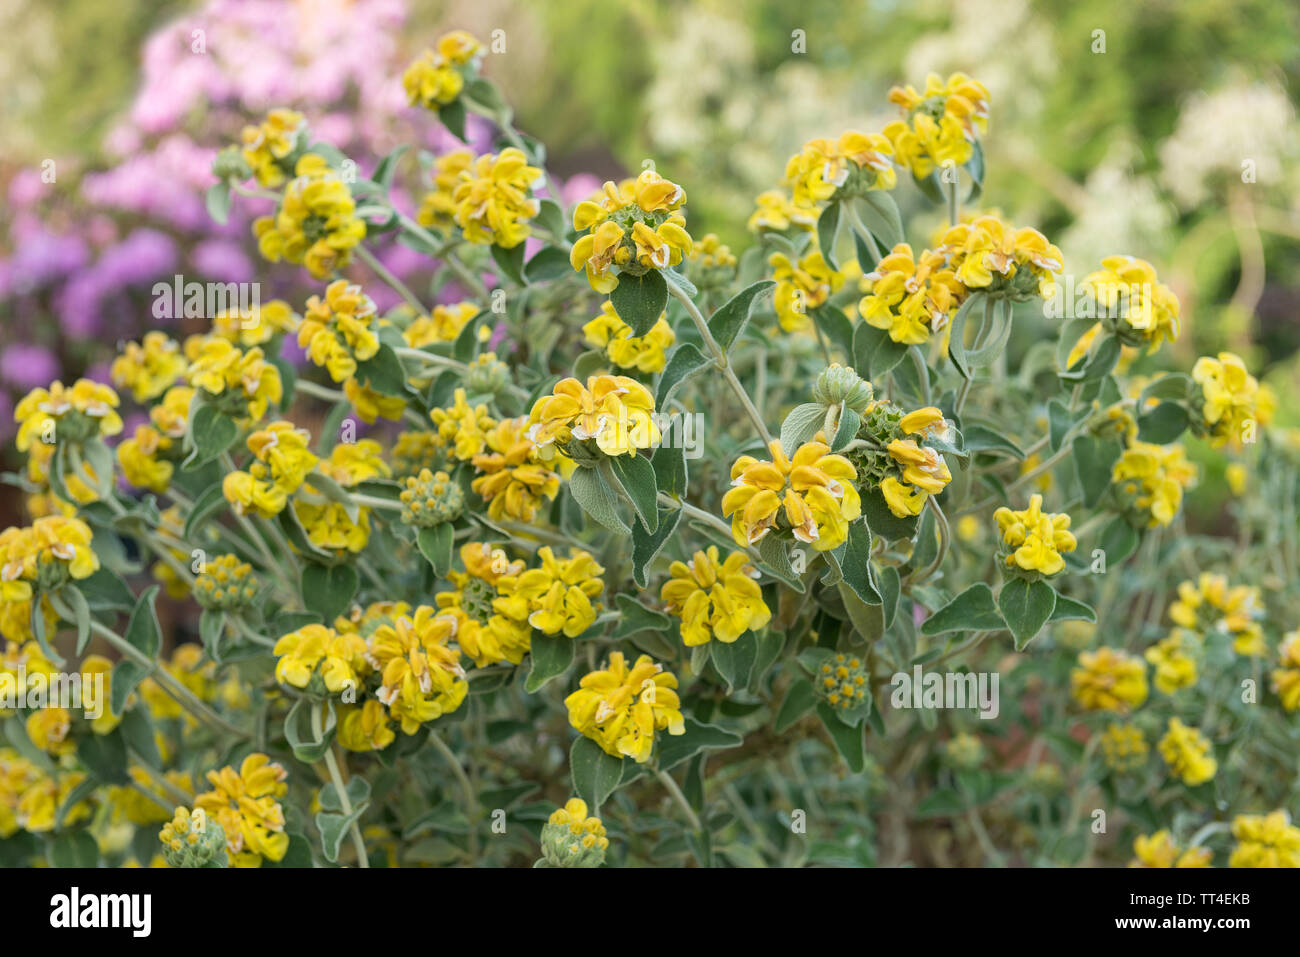 A Mediterranean shrub with bold grey leaves Jerusalem sage, Phlomis fruticosa, with hooded bright yellow flower heads on floral architectural stems Stock Photo